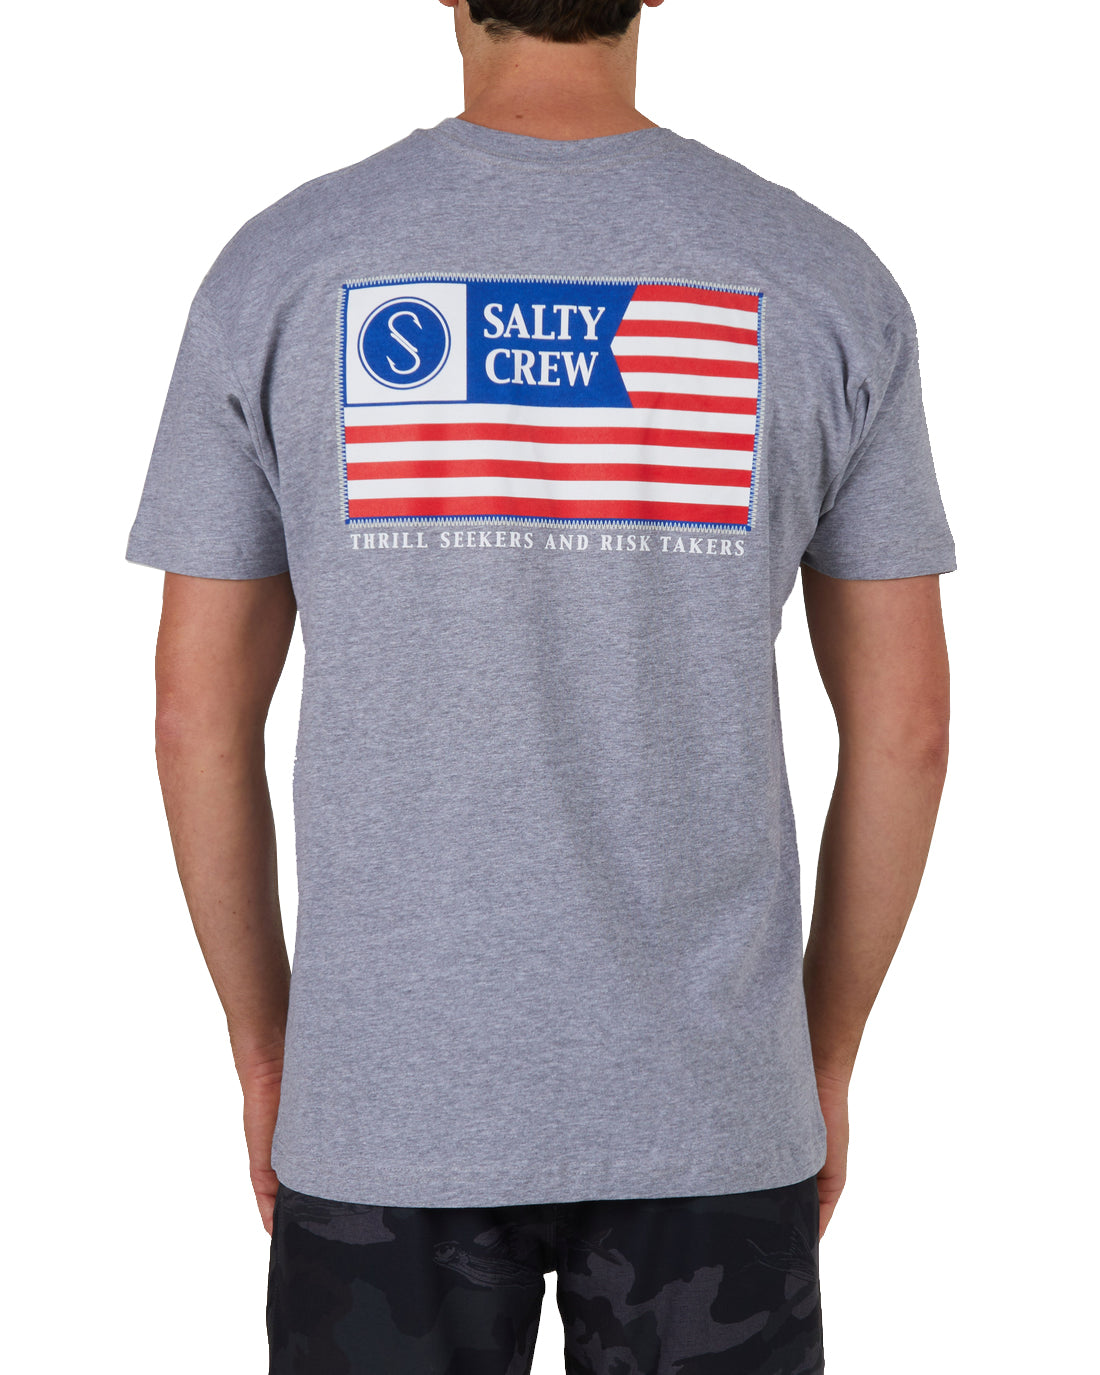 Salty Crew Freedom Flag Mens SS Tee AthleticHeather M